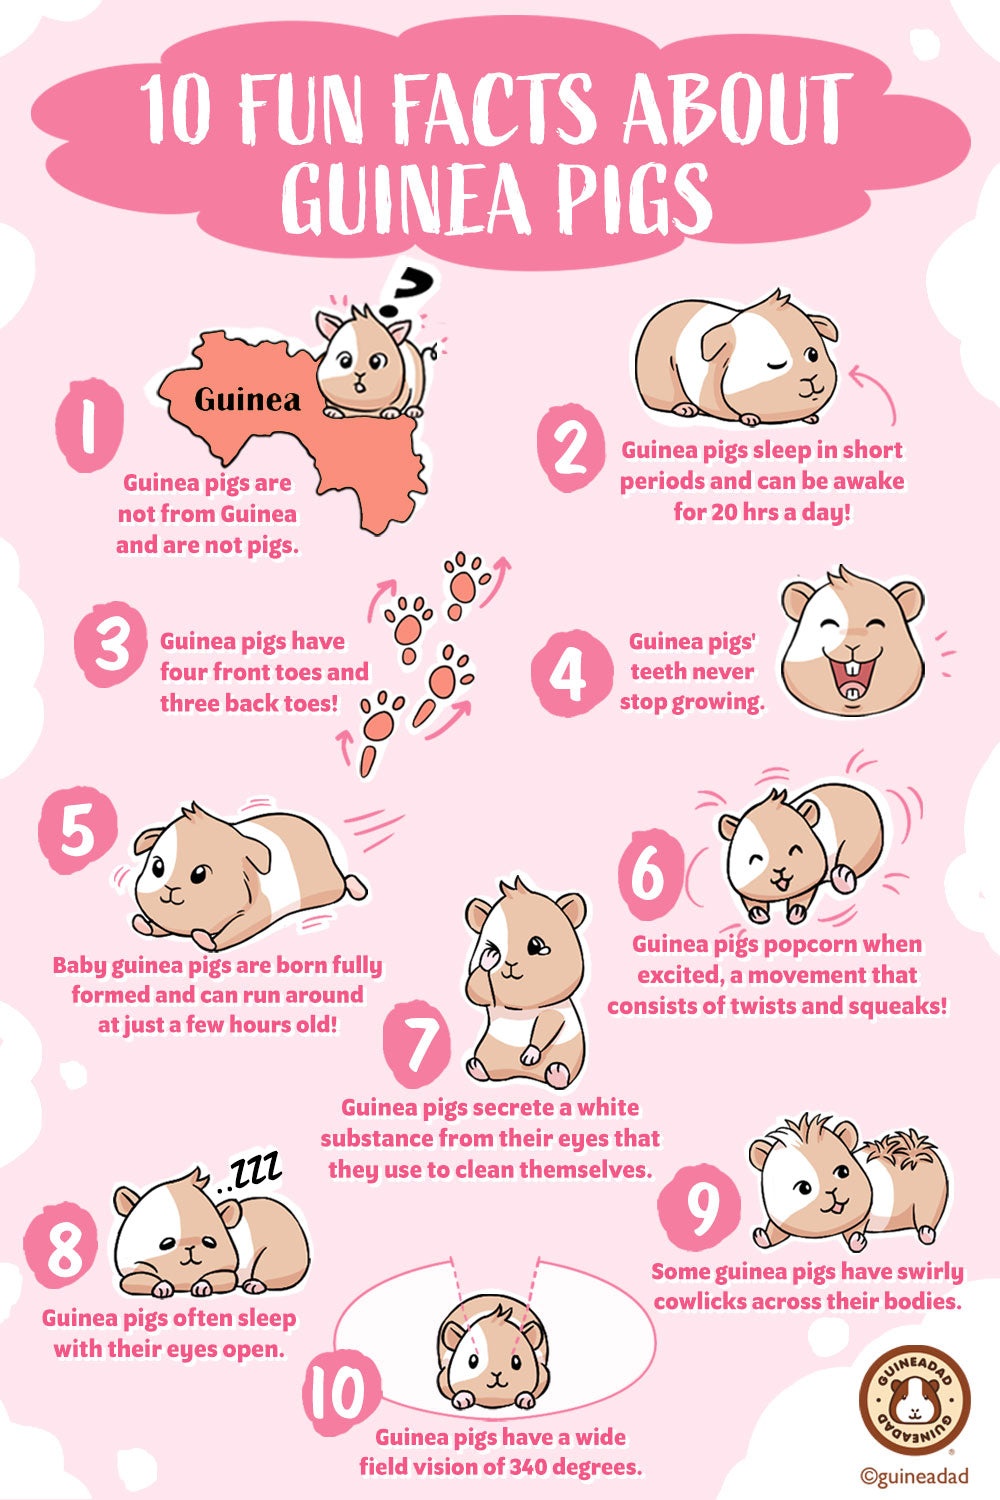 Comprehensive infographic summarizing 10 key facts about guinea pigs, combining illustrations of their origin, unique sleeping patterns, toe count, tooth growth, newborn development, 'popcorning' behavior, eye secretions, open-eyed sleep, rosette fur patterns, and wide field of vision. Designed for educational purposes and ideal for printing.